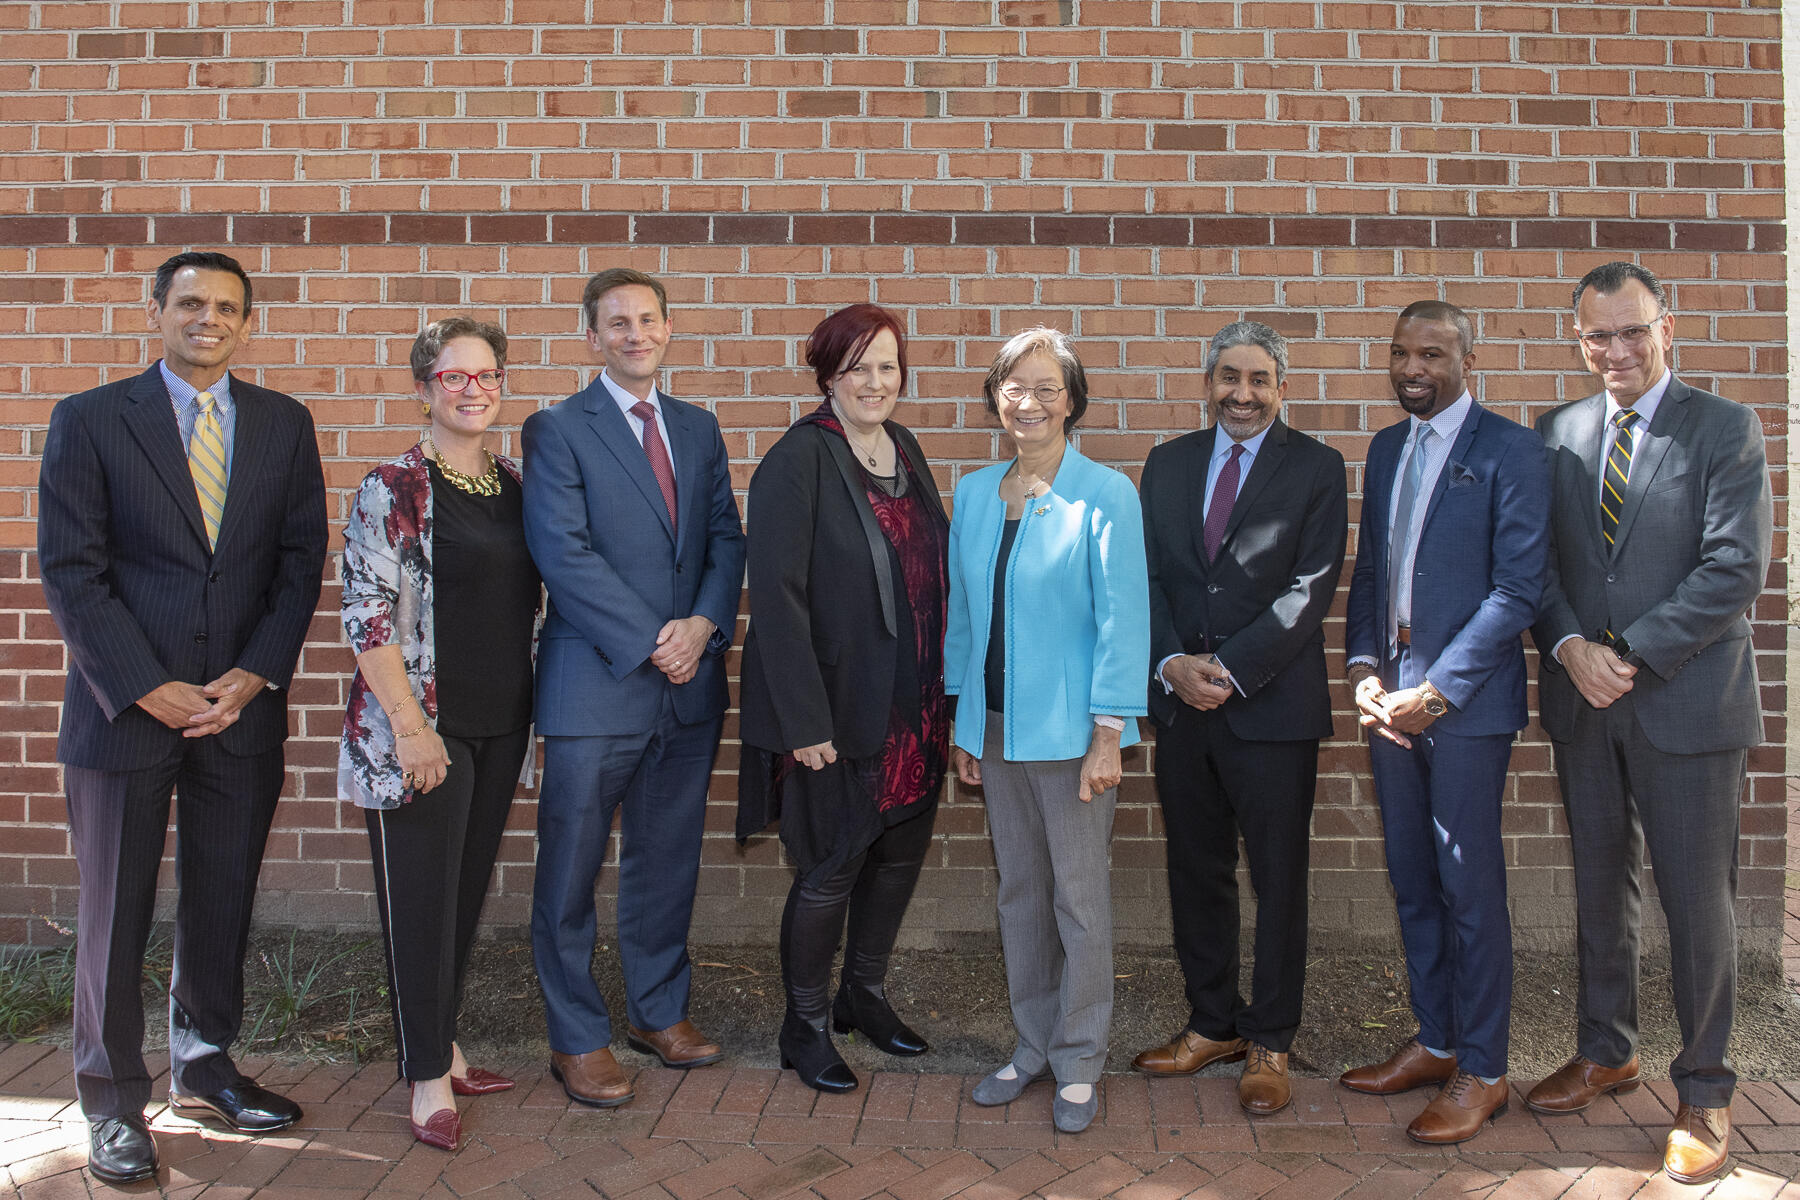 VCU President Michael Rao, far left, and Provost Fotis Sotiropoulos, far right, with the 2021 faculty convocation honorees (from left): Peyton Rowe, Alan Dow, Jeanine Guidry, Pin-Lan Li, Omar Abubaker and LaRon A. Scott.